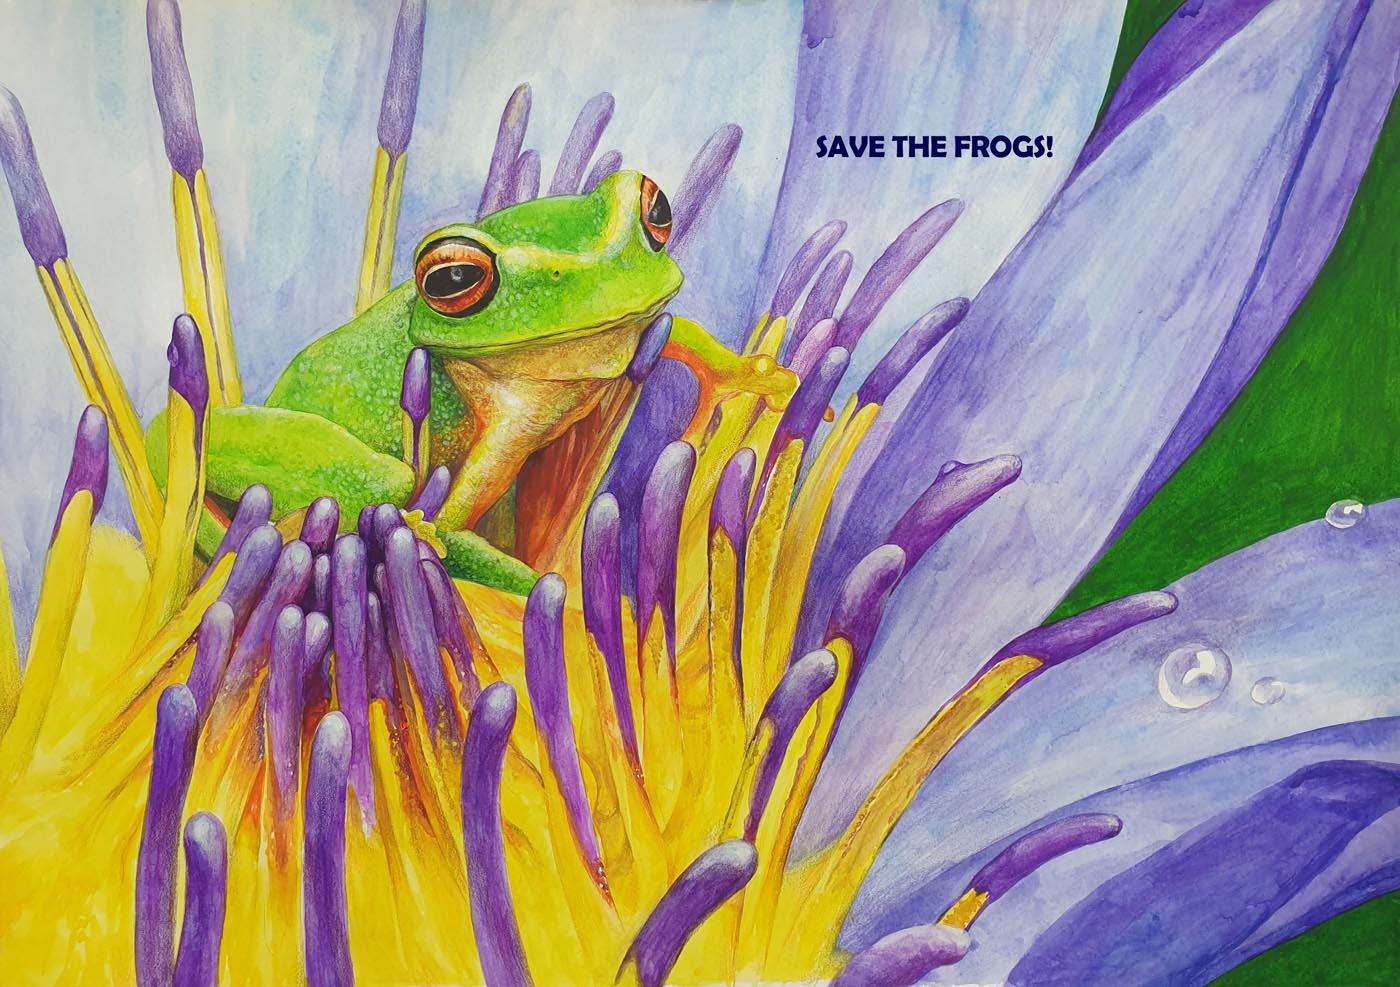 Hyunseo-Lee-South Korea-2021-save-the-frogs-art-contest 第二名获胜者